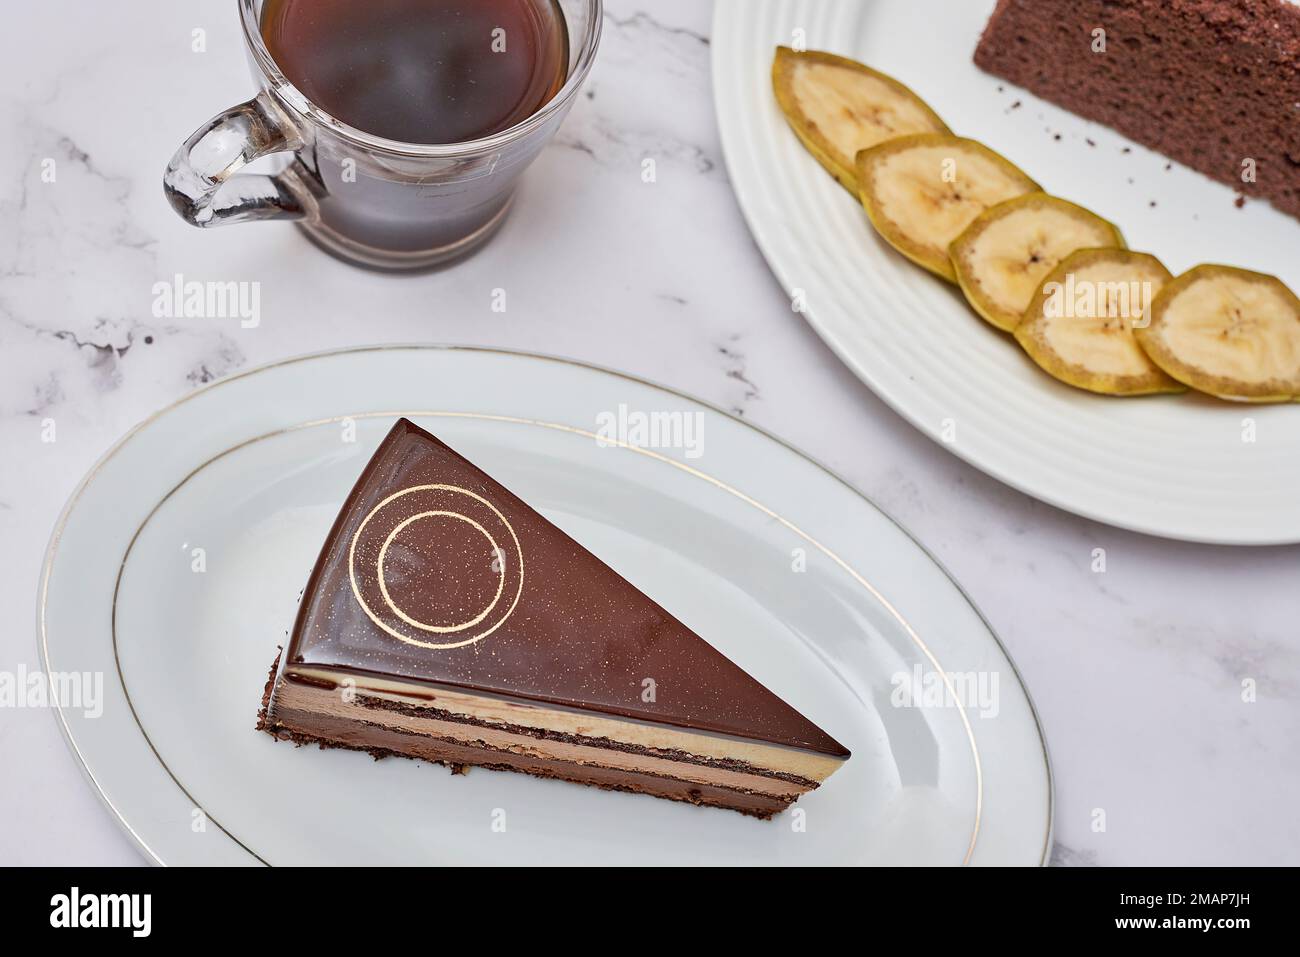 a piece of chocolate cake on a plate with a cup of coffee and banana slices in the photo is taken Stock Photo